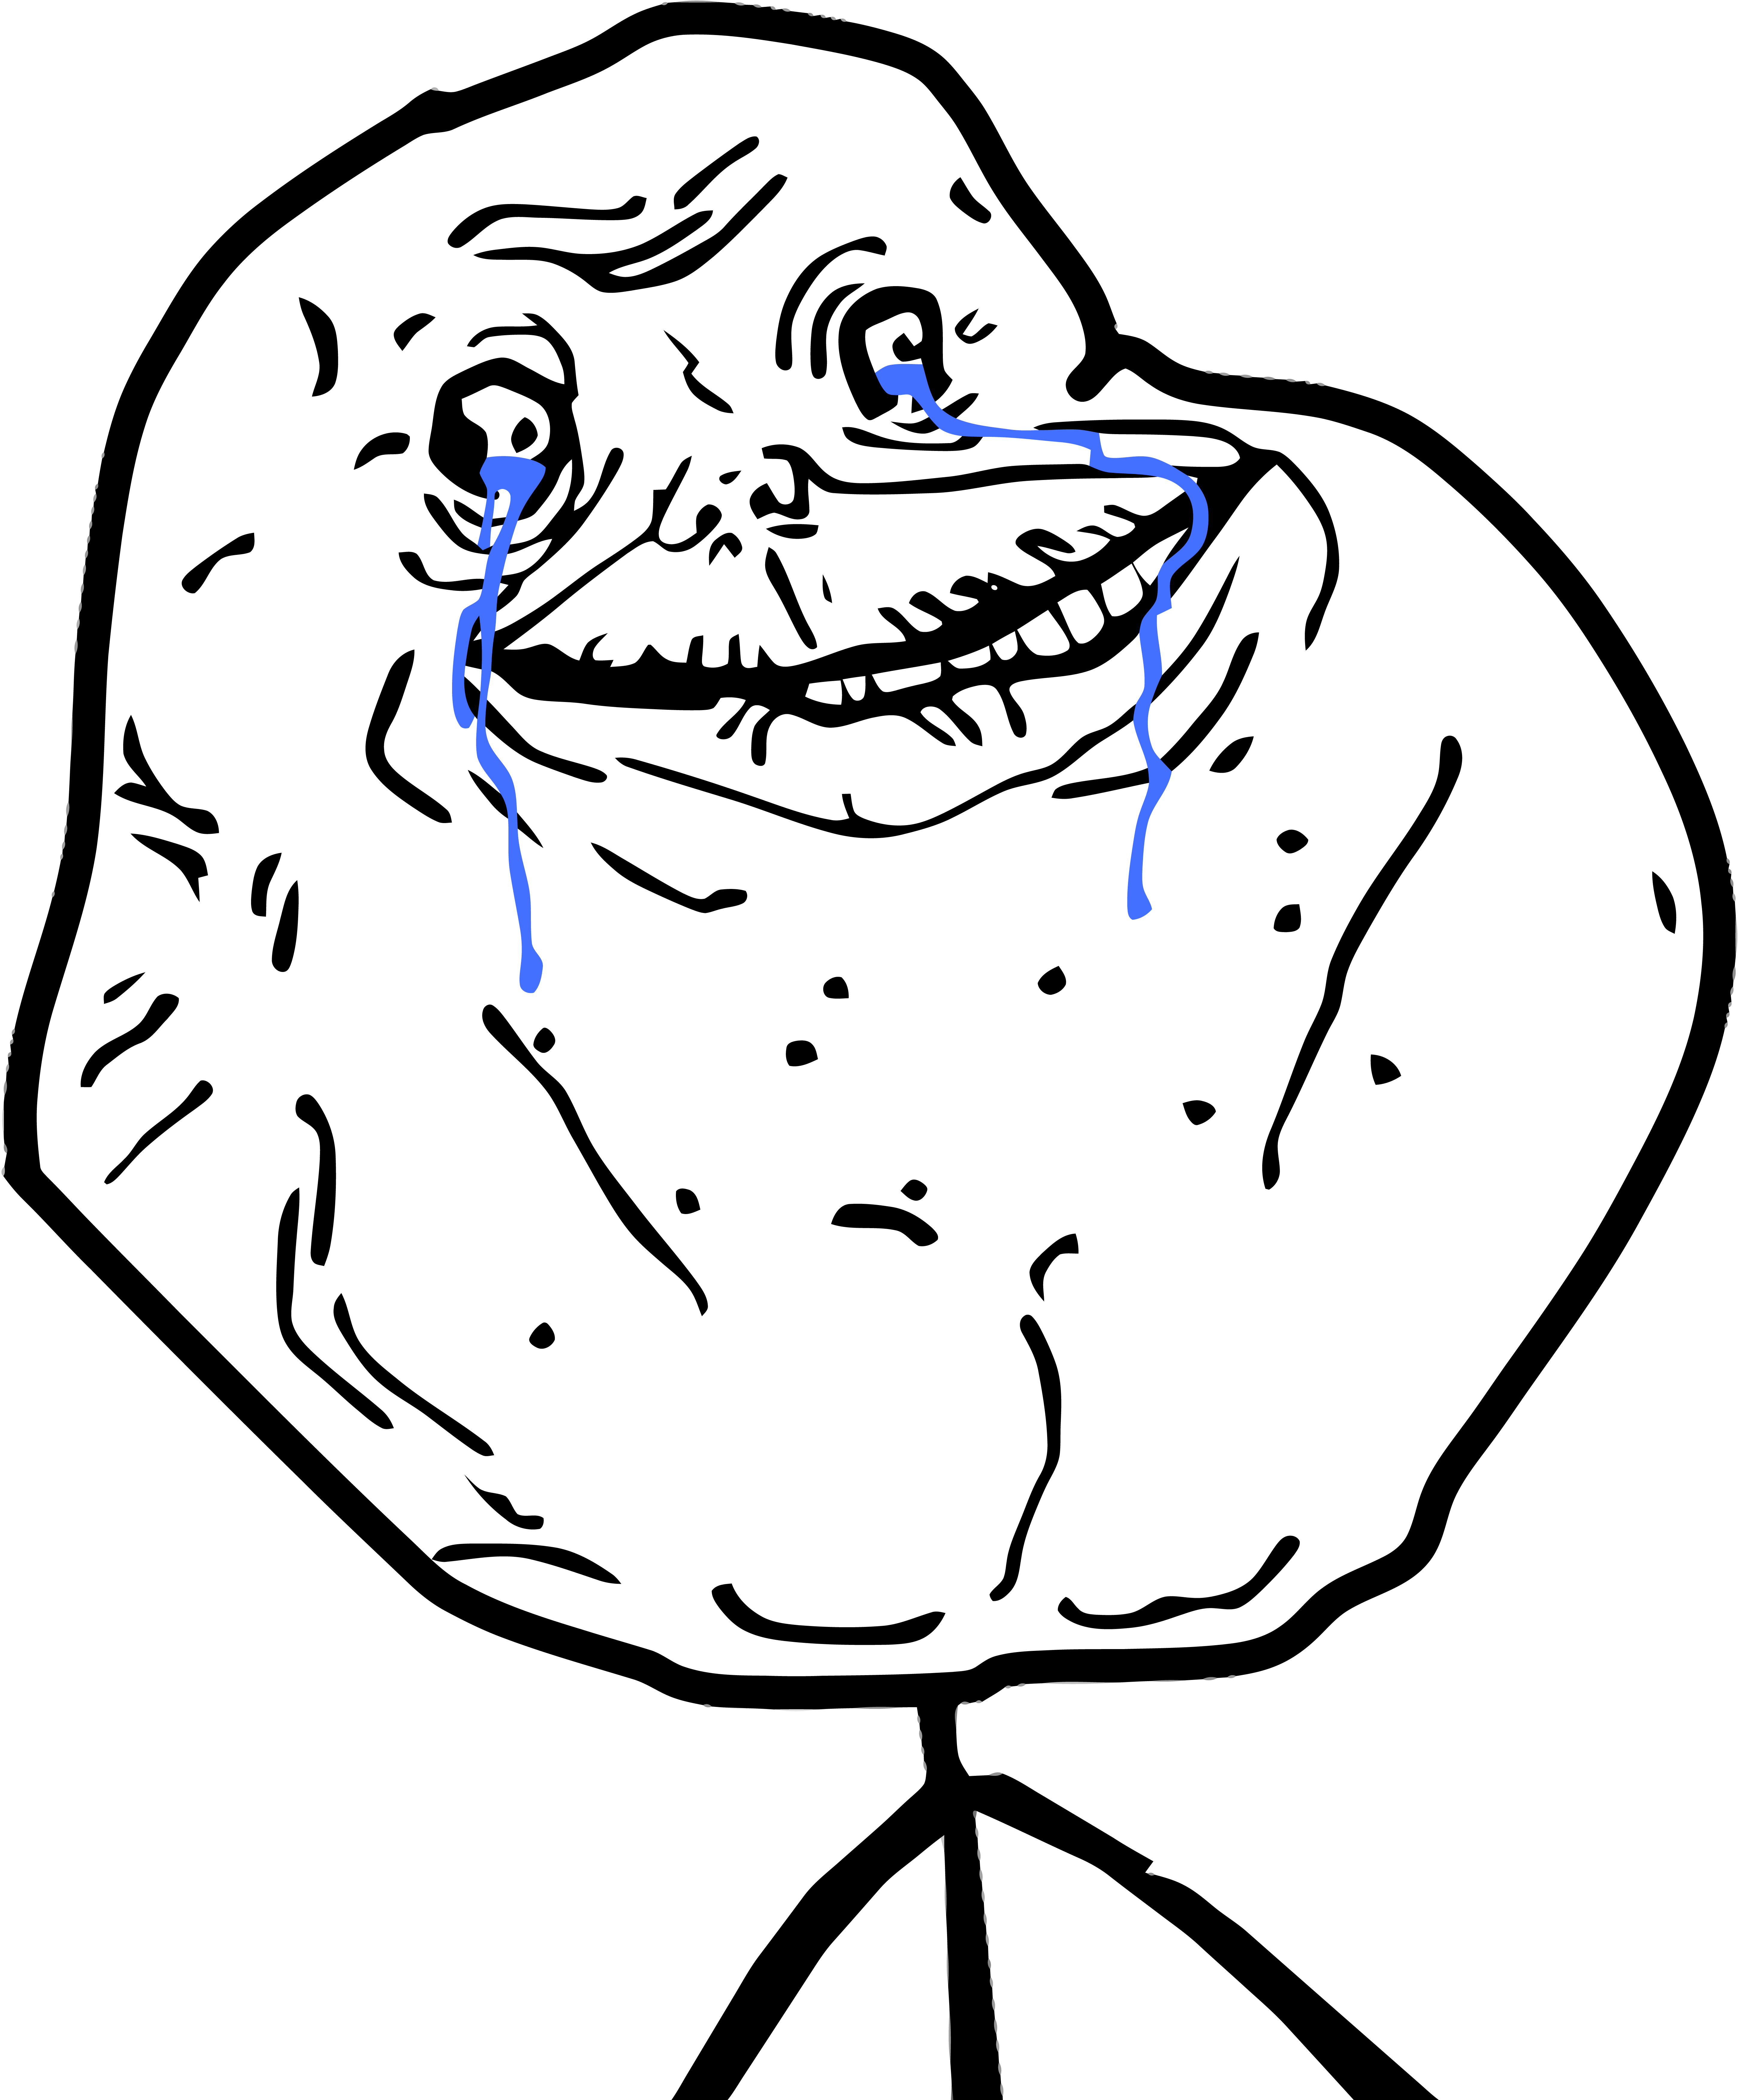 forever_alone_by_rober_raik-d4clvo4.png